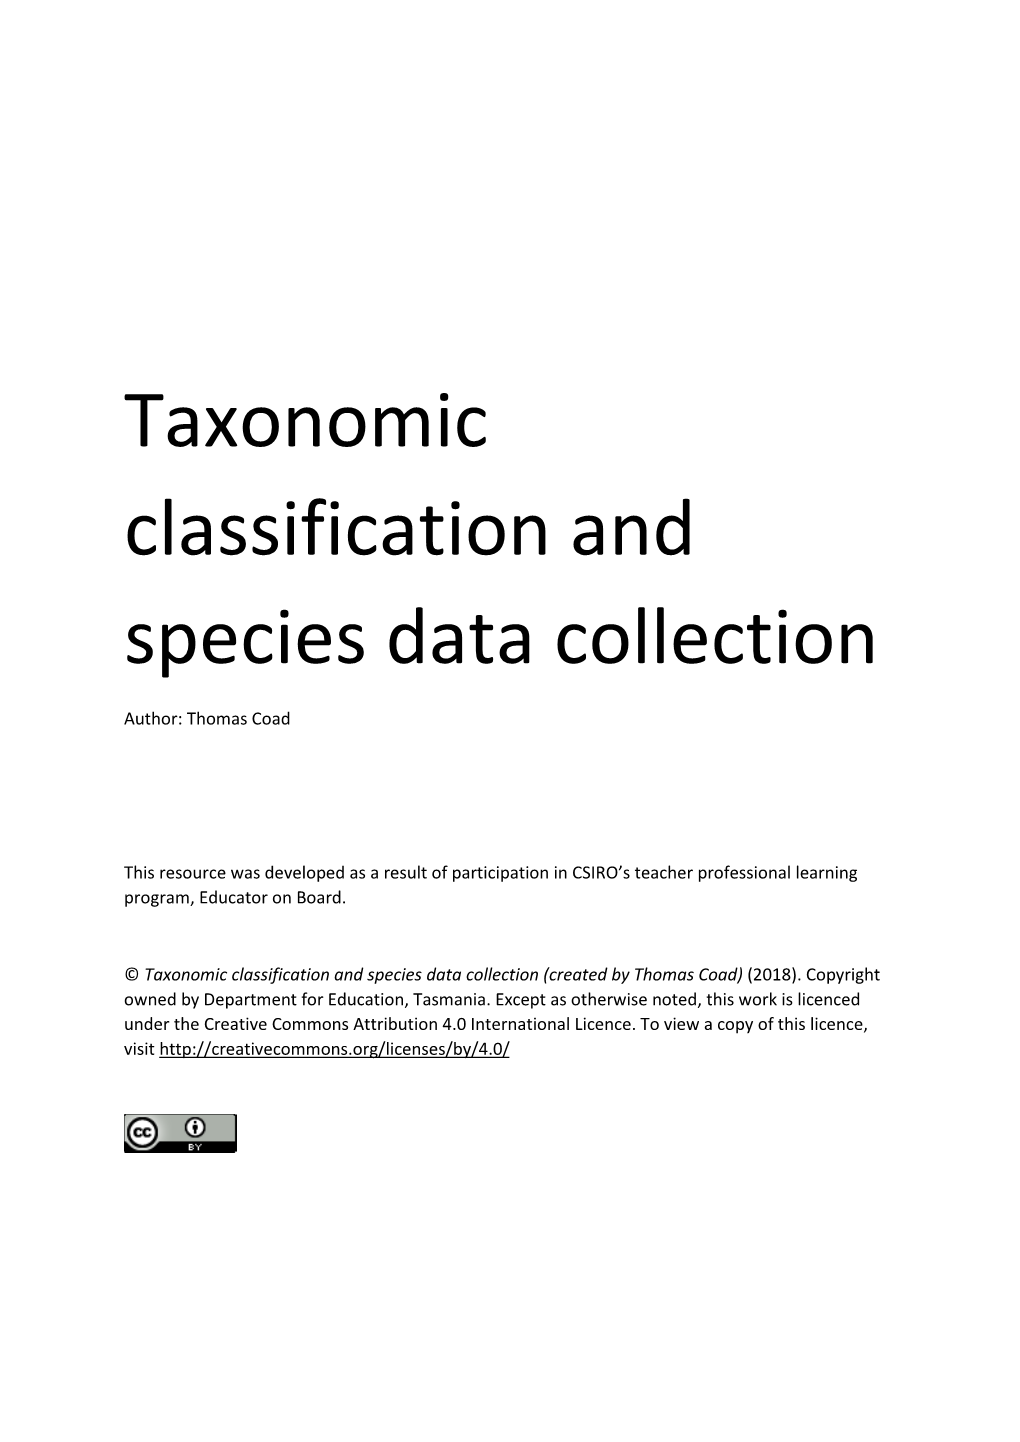 Taxonomic Classification and Species Data Collection